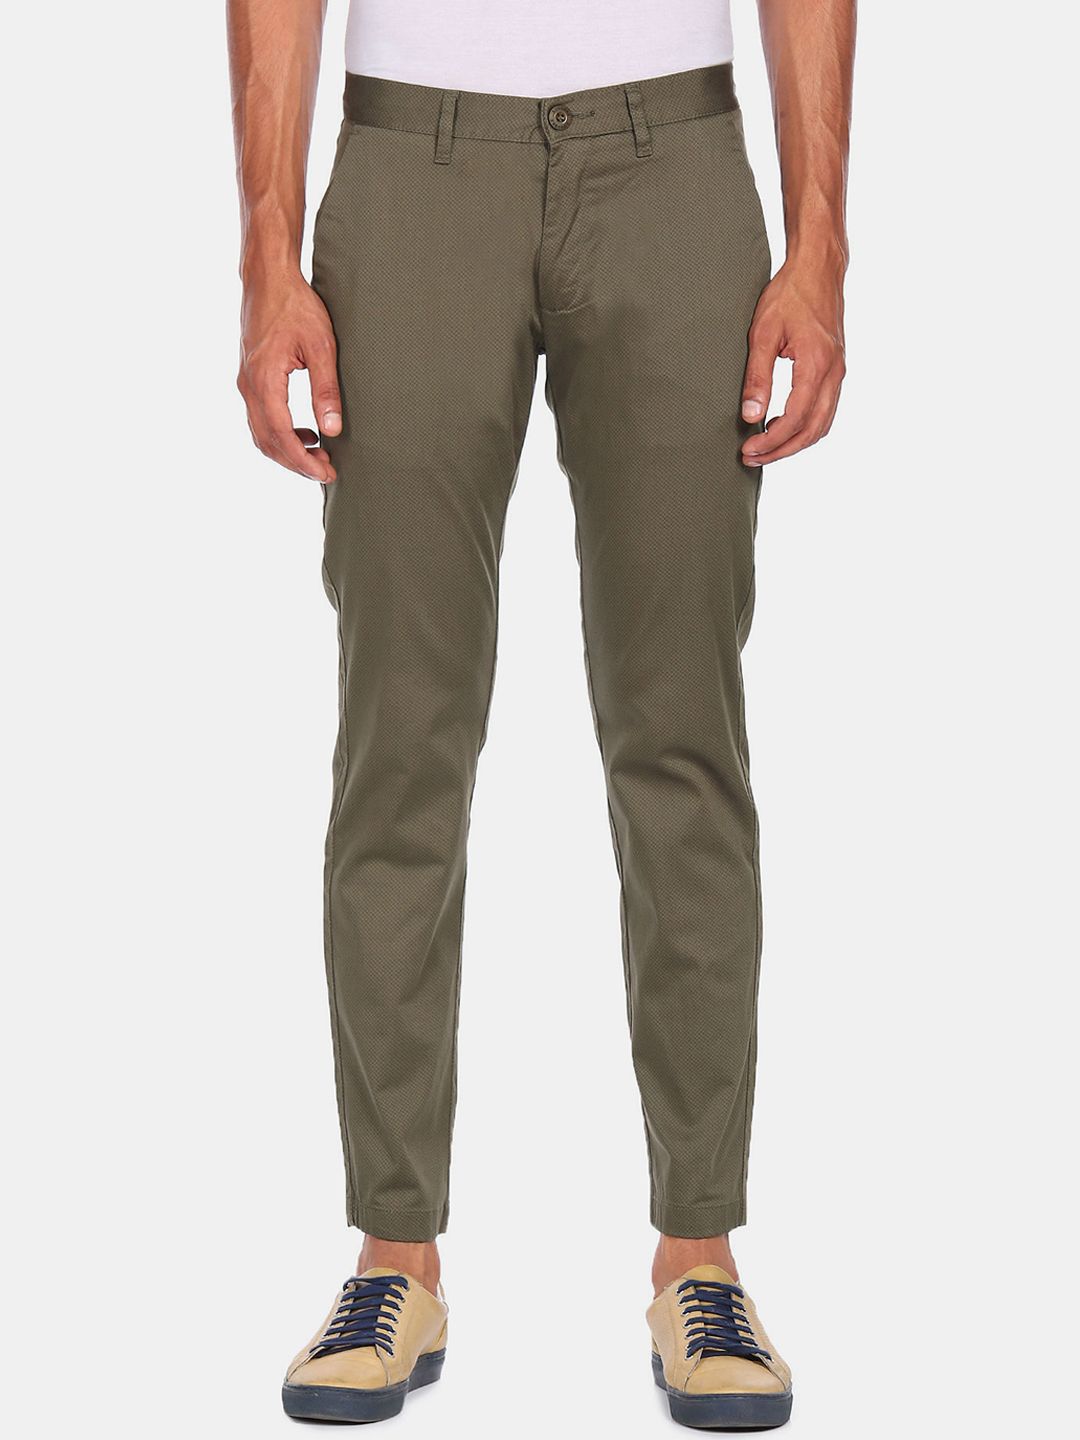 Buy Black Trousers  Pants for Men by Roots by Ruggers Online  Ajiocom